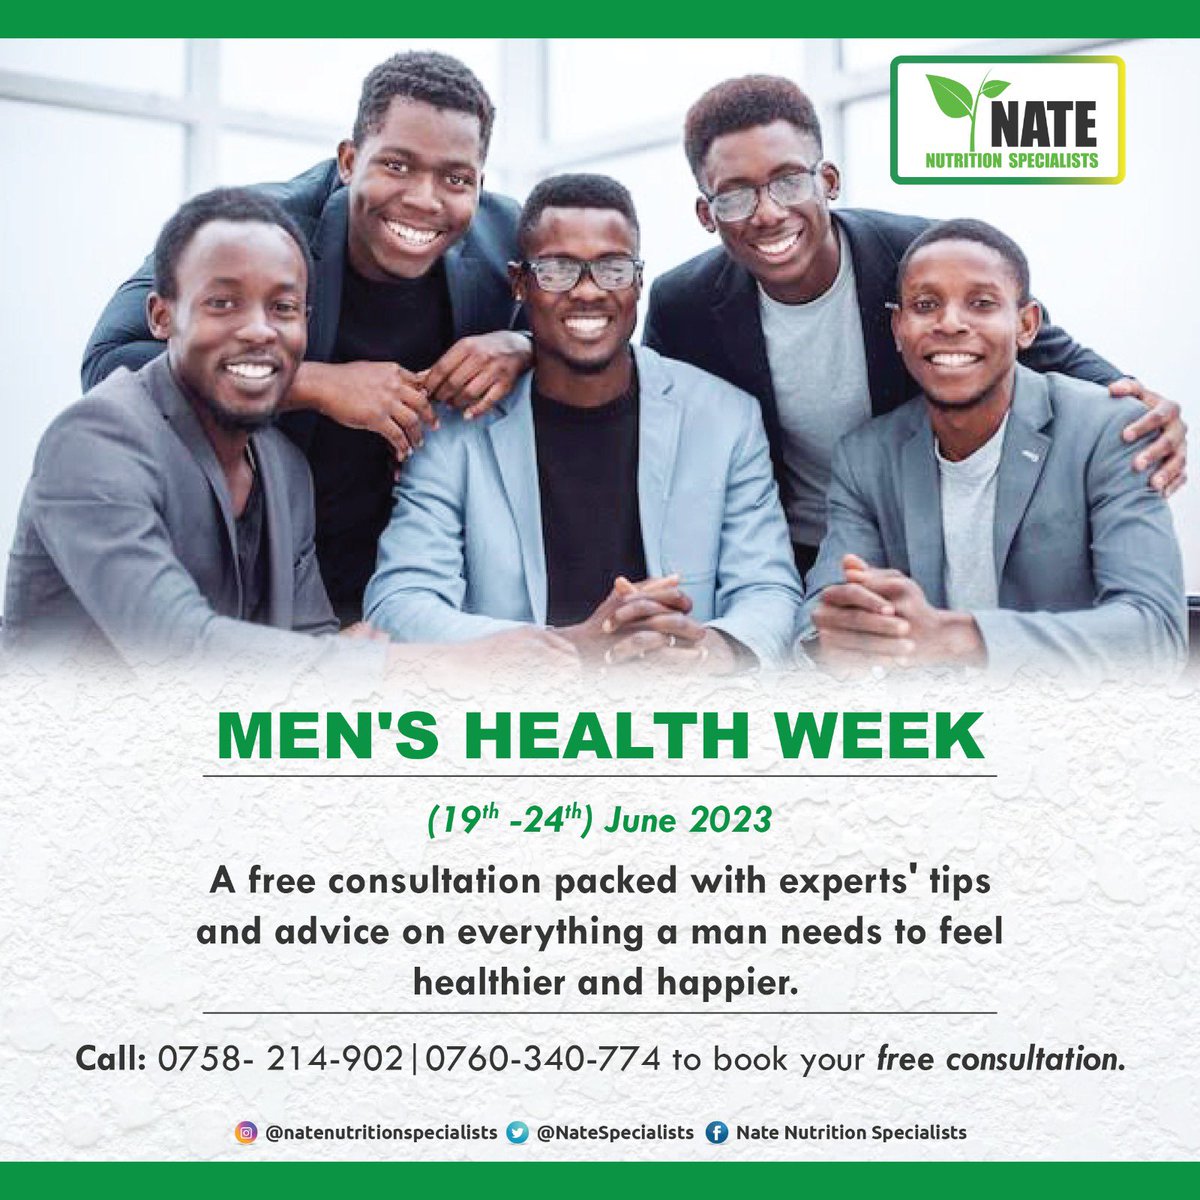 Here is a beautiful opportunity for all the men.

Book your slot for a free consultation with our experts. @NateSpecialists 

Men, it’s your time!

#FathersDay #MensHealthWeek